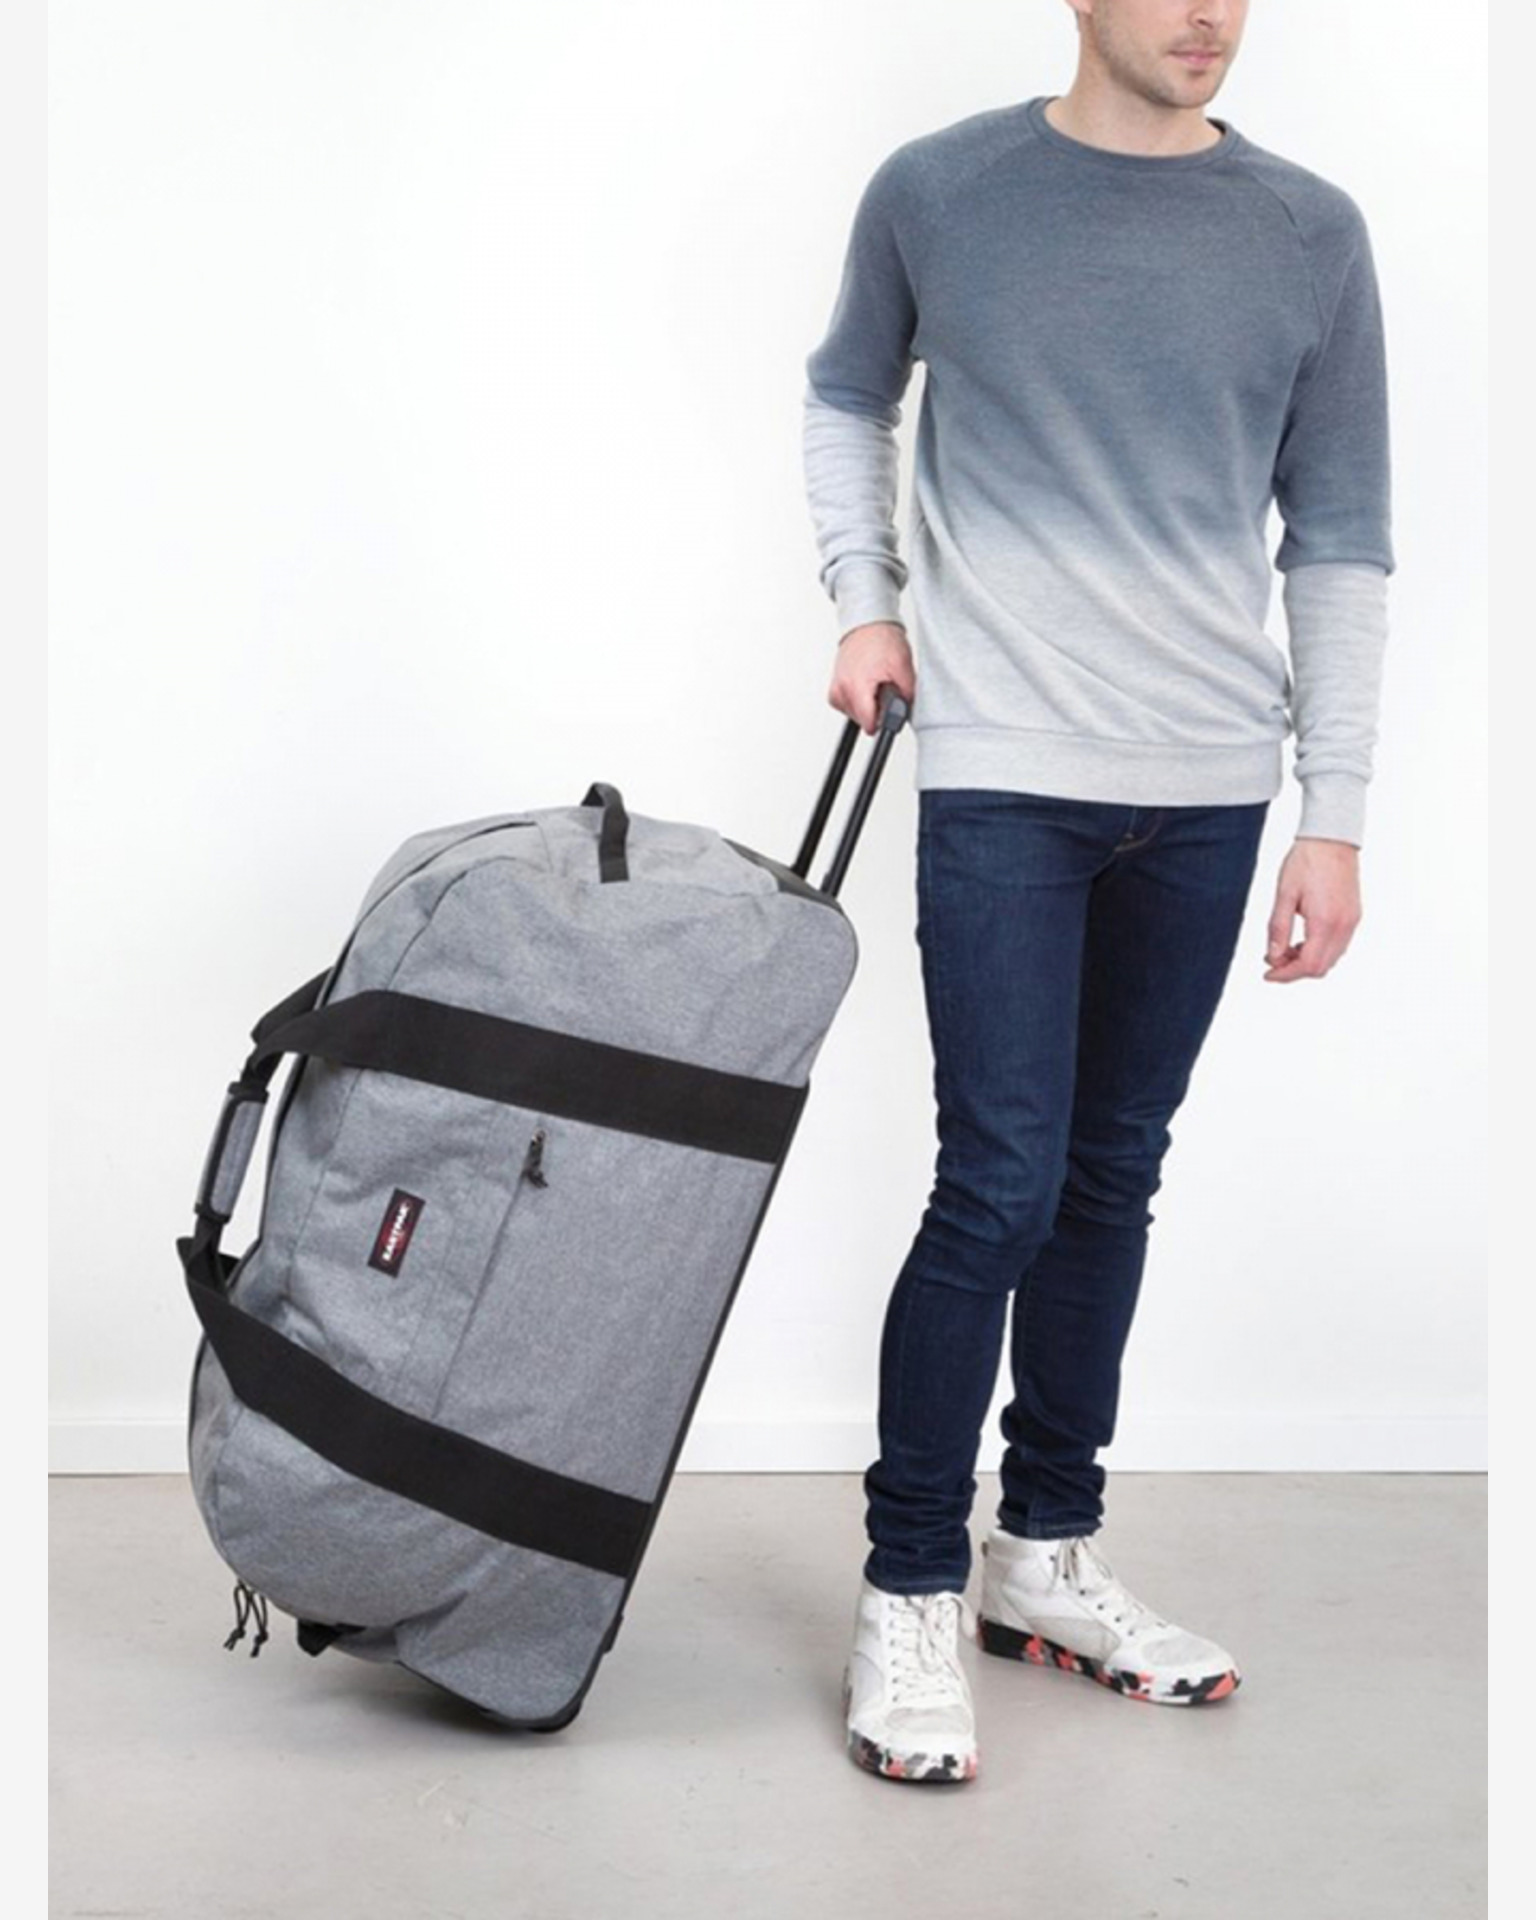 Eastpak - Container 85 Travel bag